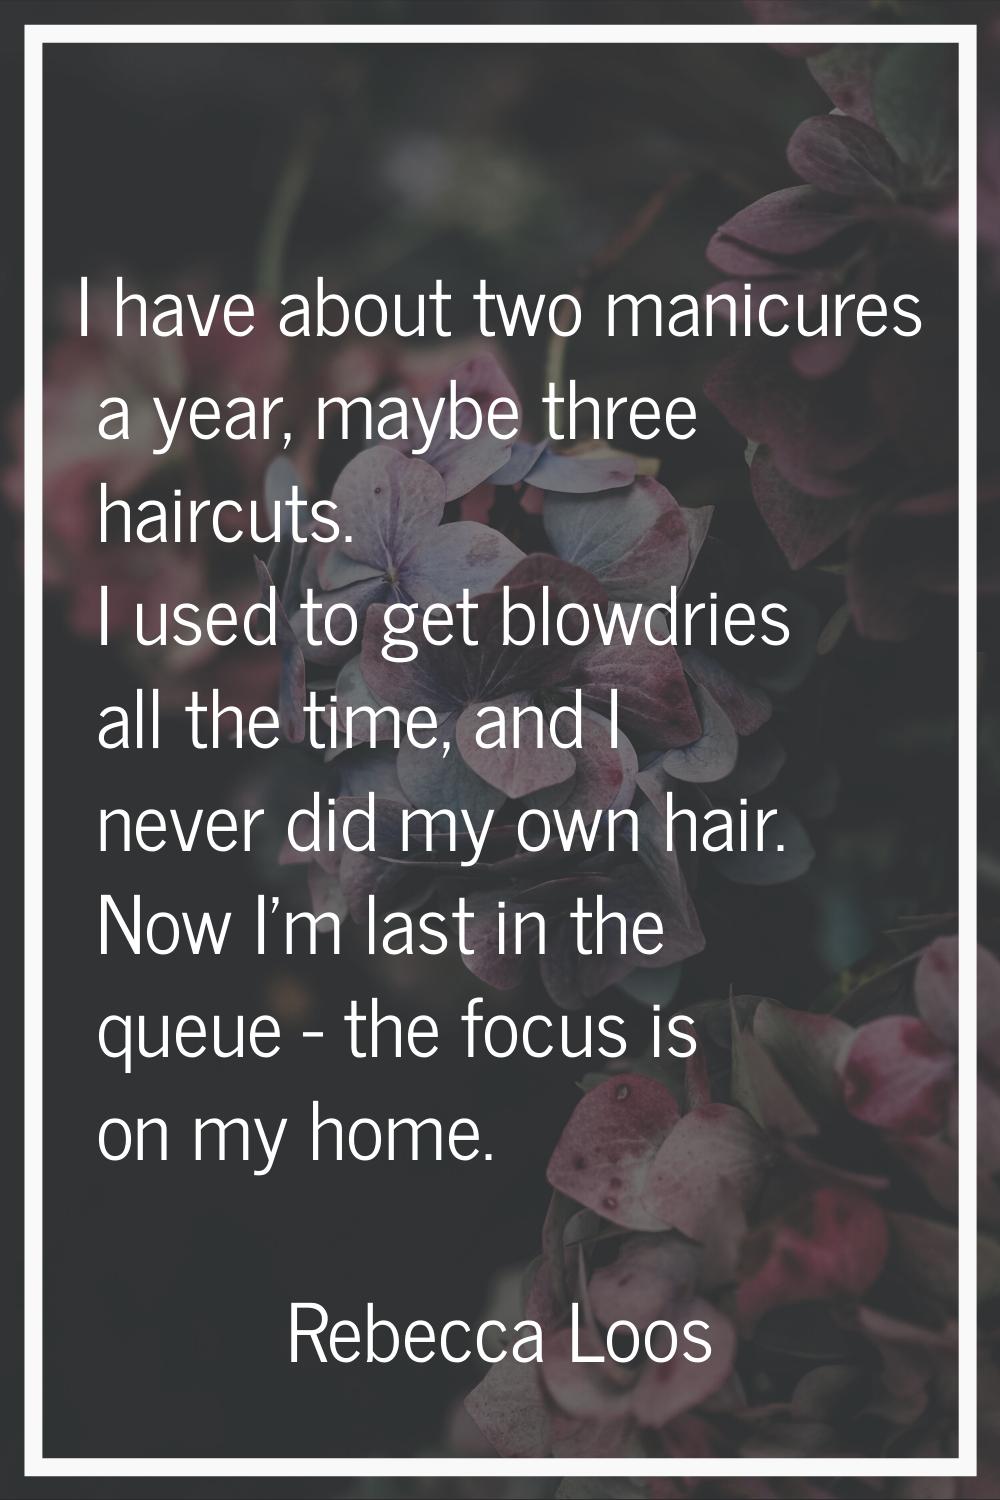 I have about two manicures a year, maybe three haircuts. I used to get blowdries all the time, and 